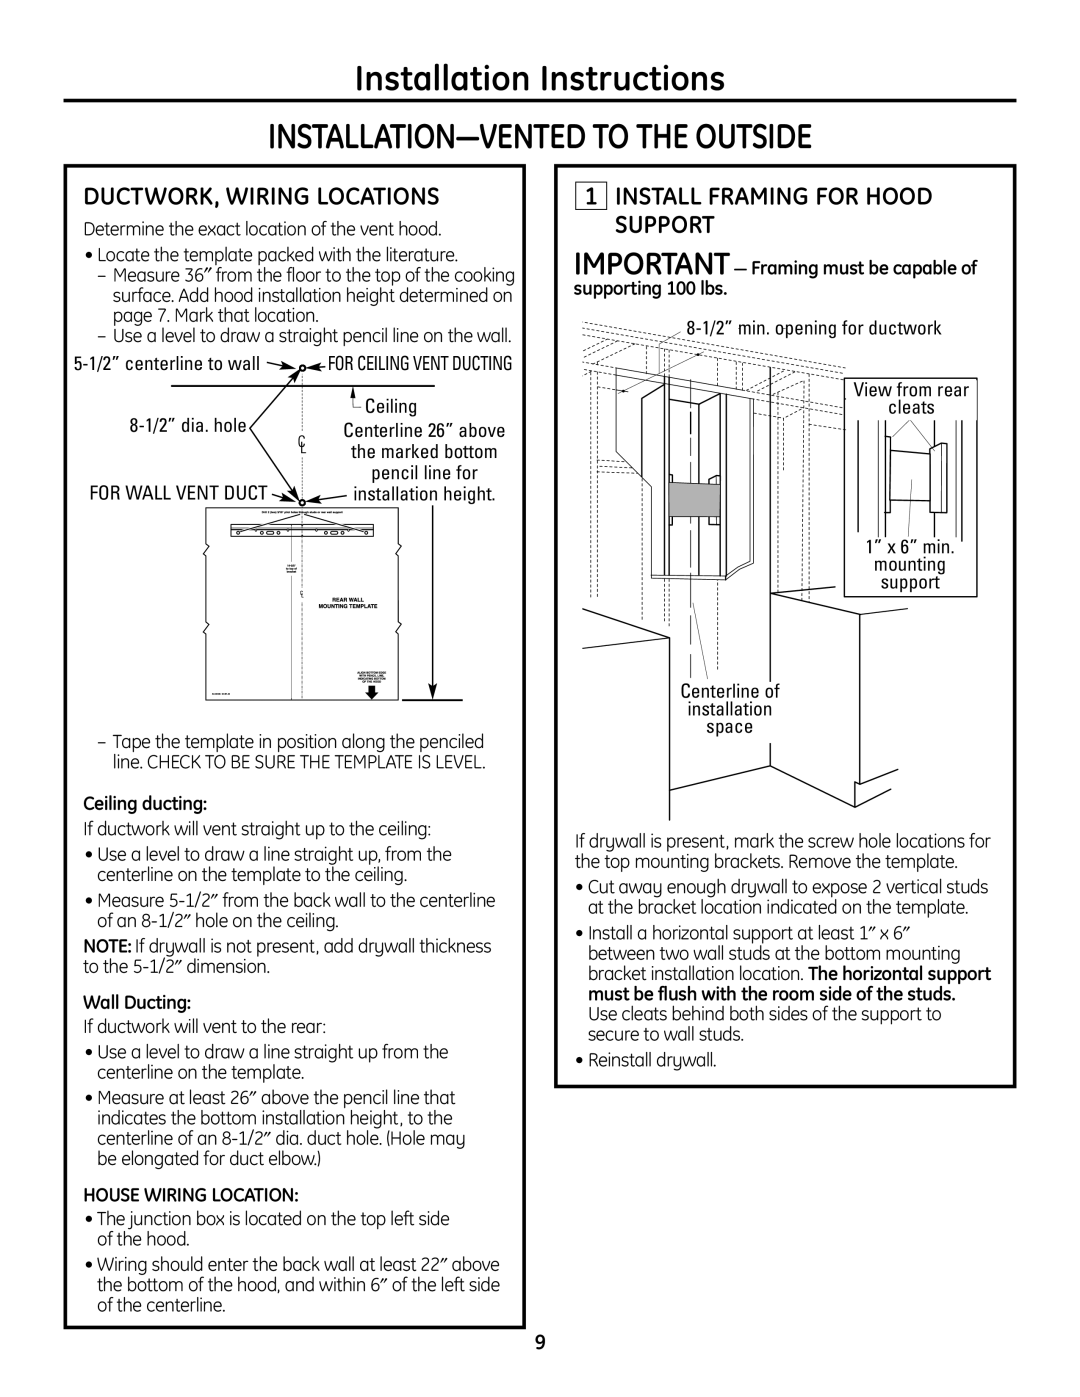 GE ZV900 Installation Instructions INSTALLATION-VENTED TO THE OUTSIDE, Ductwork, Wiring Locations, Ceiling ducting 